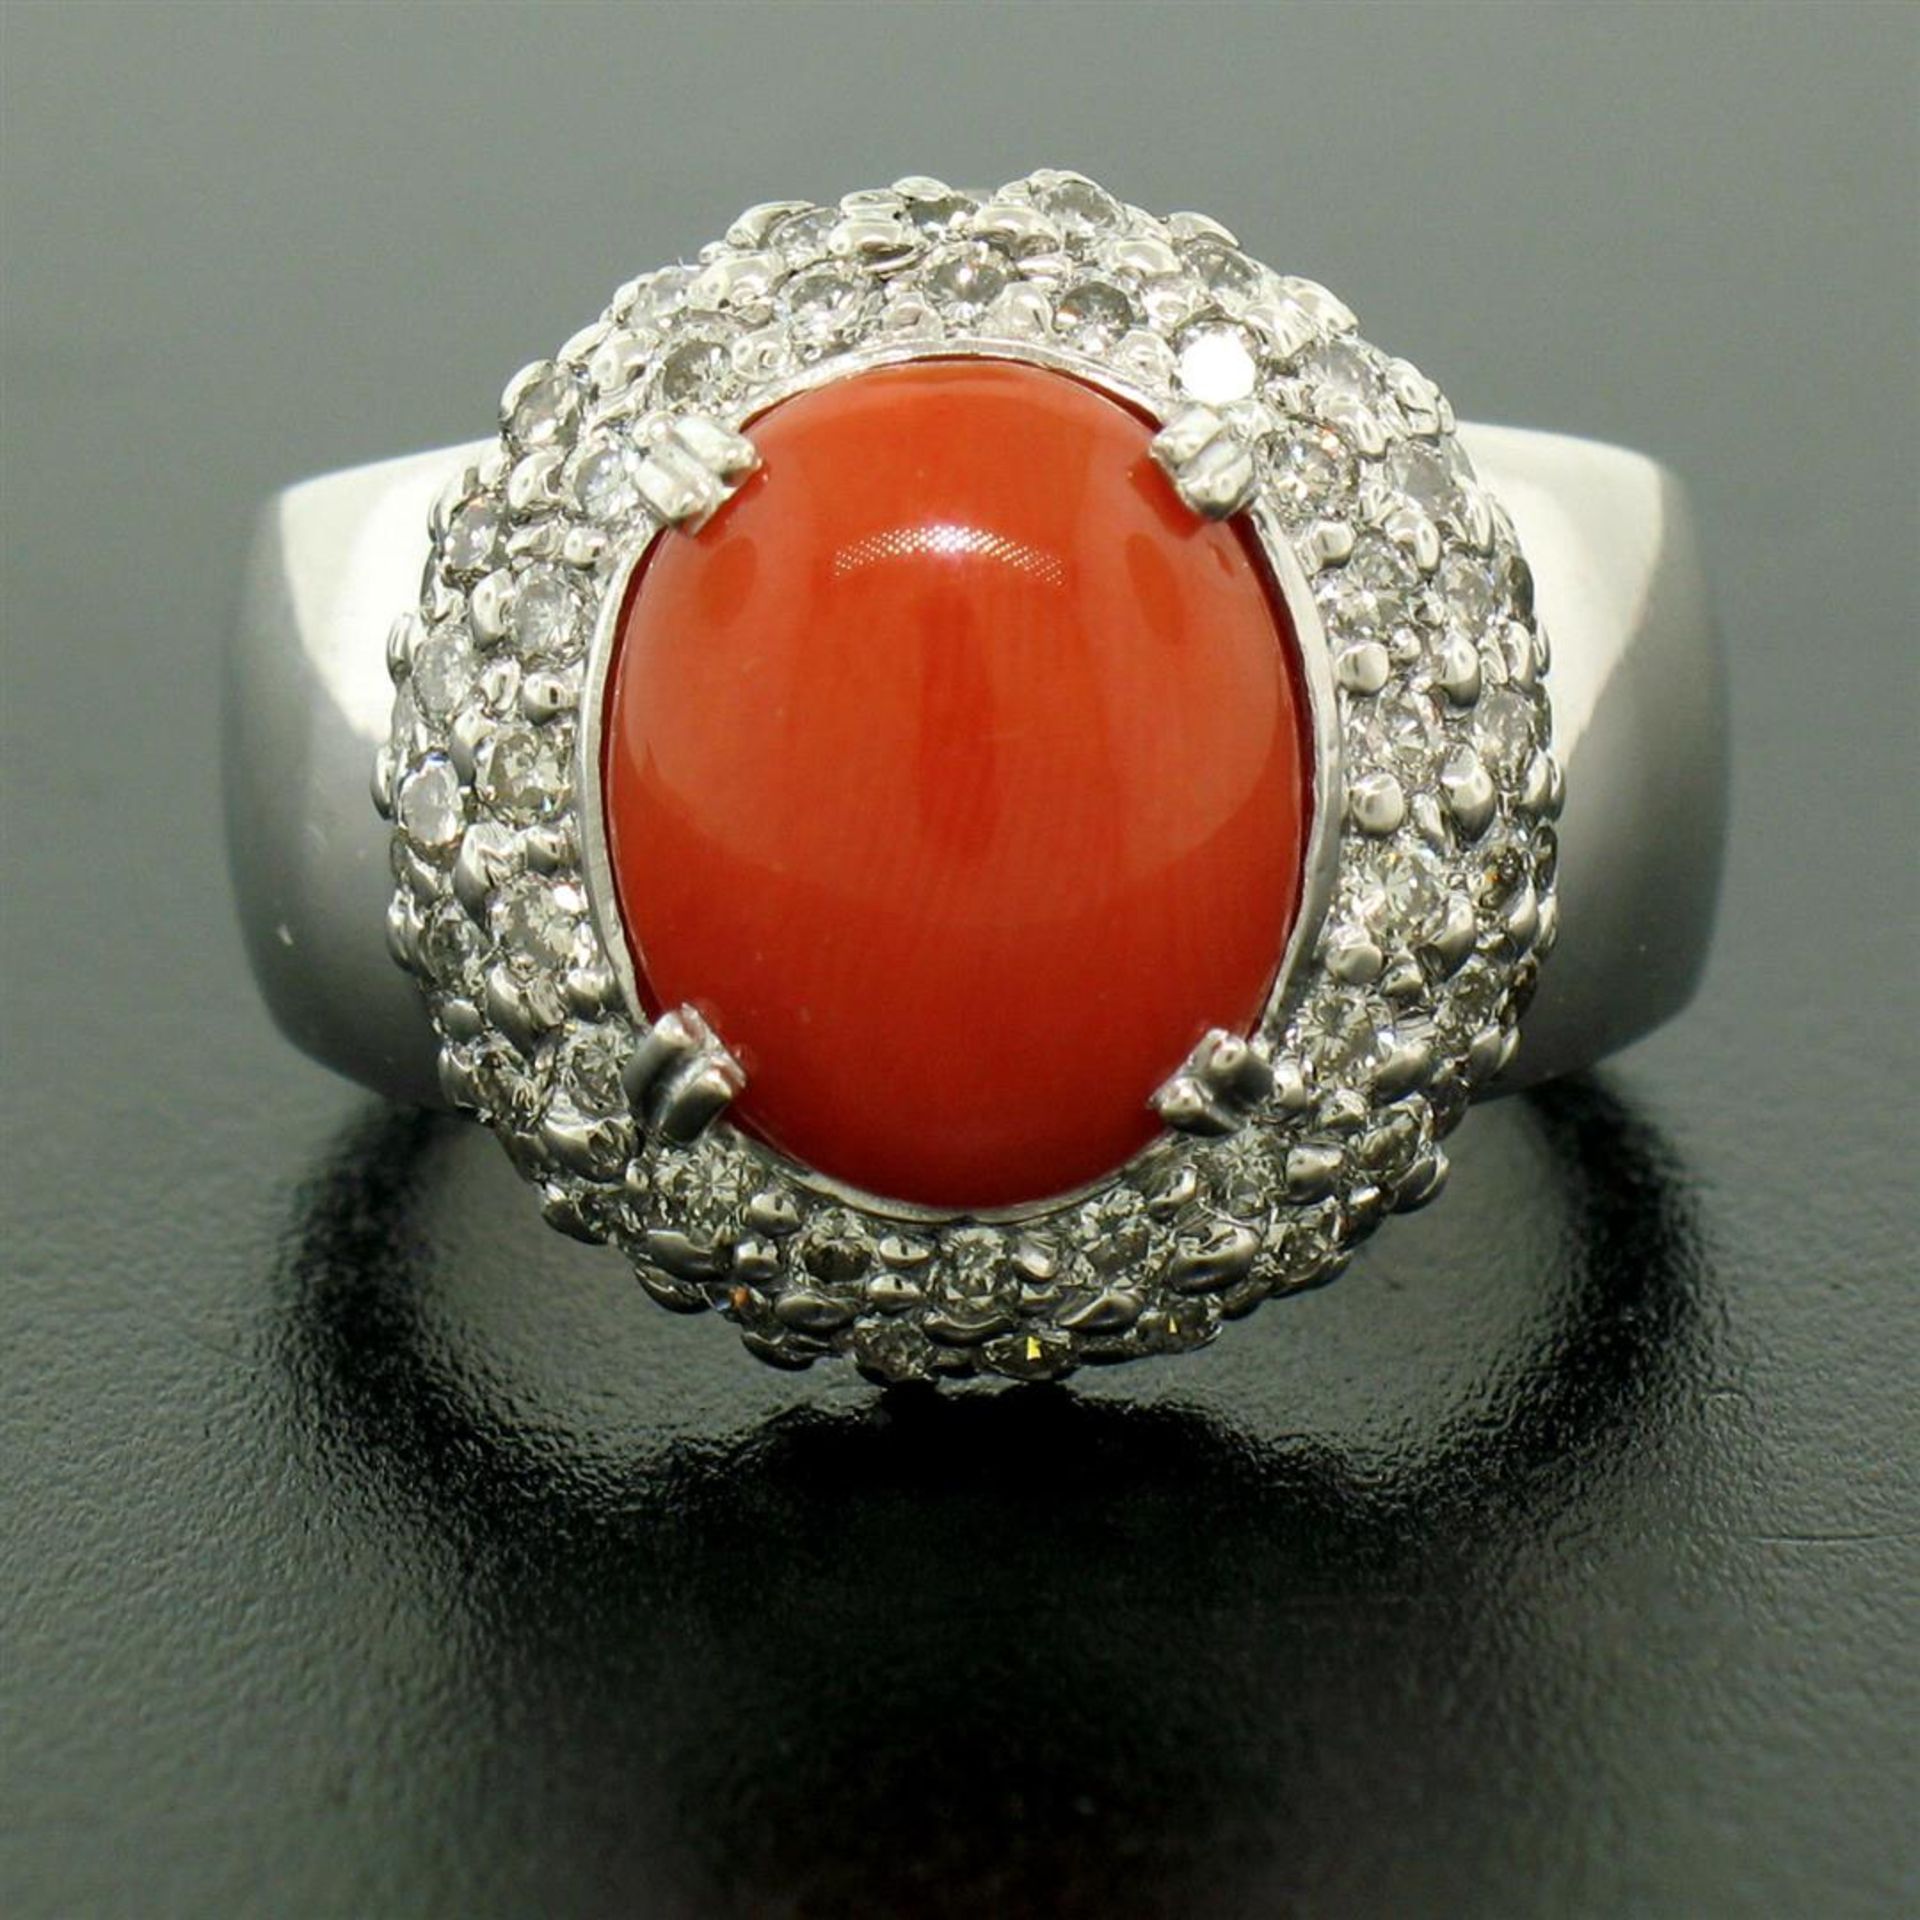 14kt White Gold Oval Cabochon Red Coral Ring w/ 2.10ctw Diamond Halo - Image 7 of 8